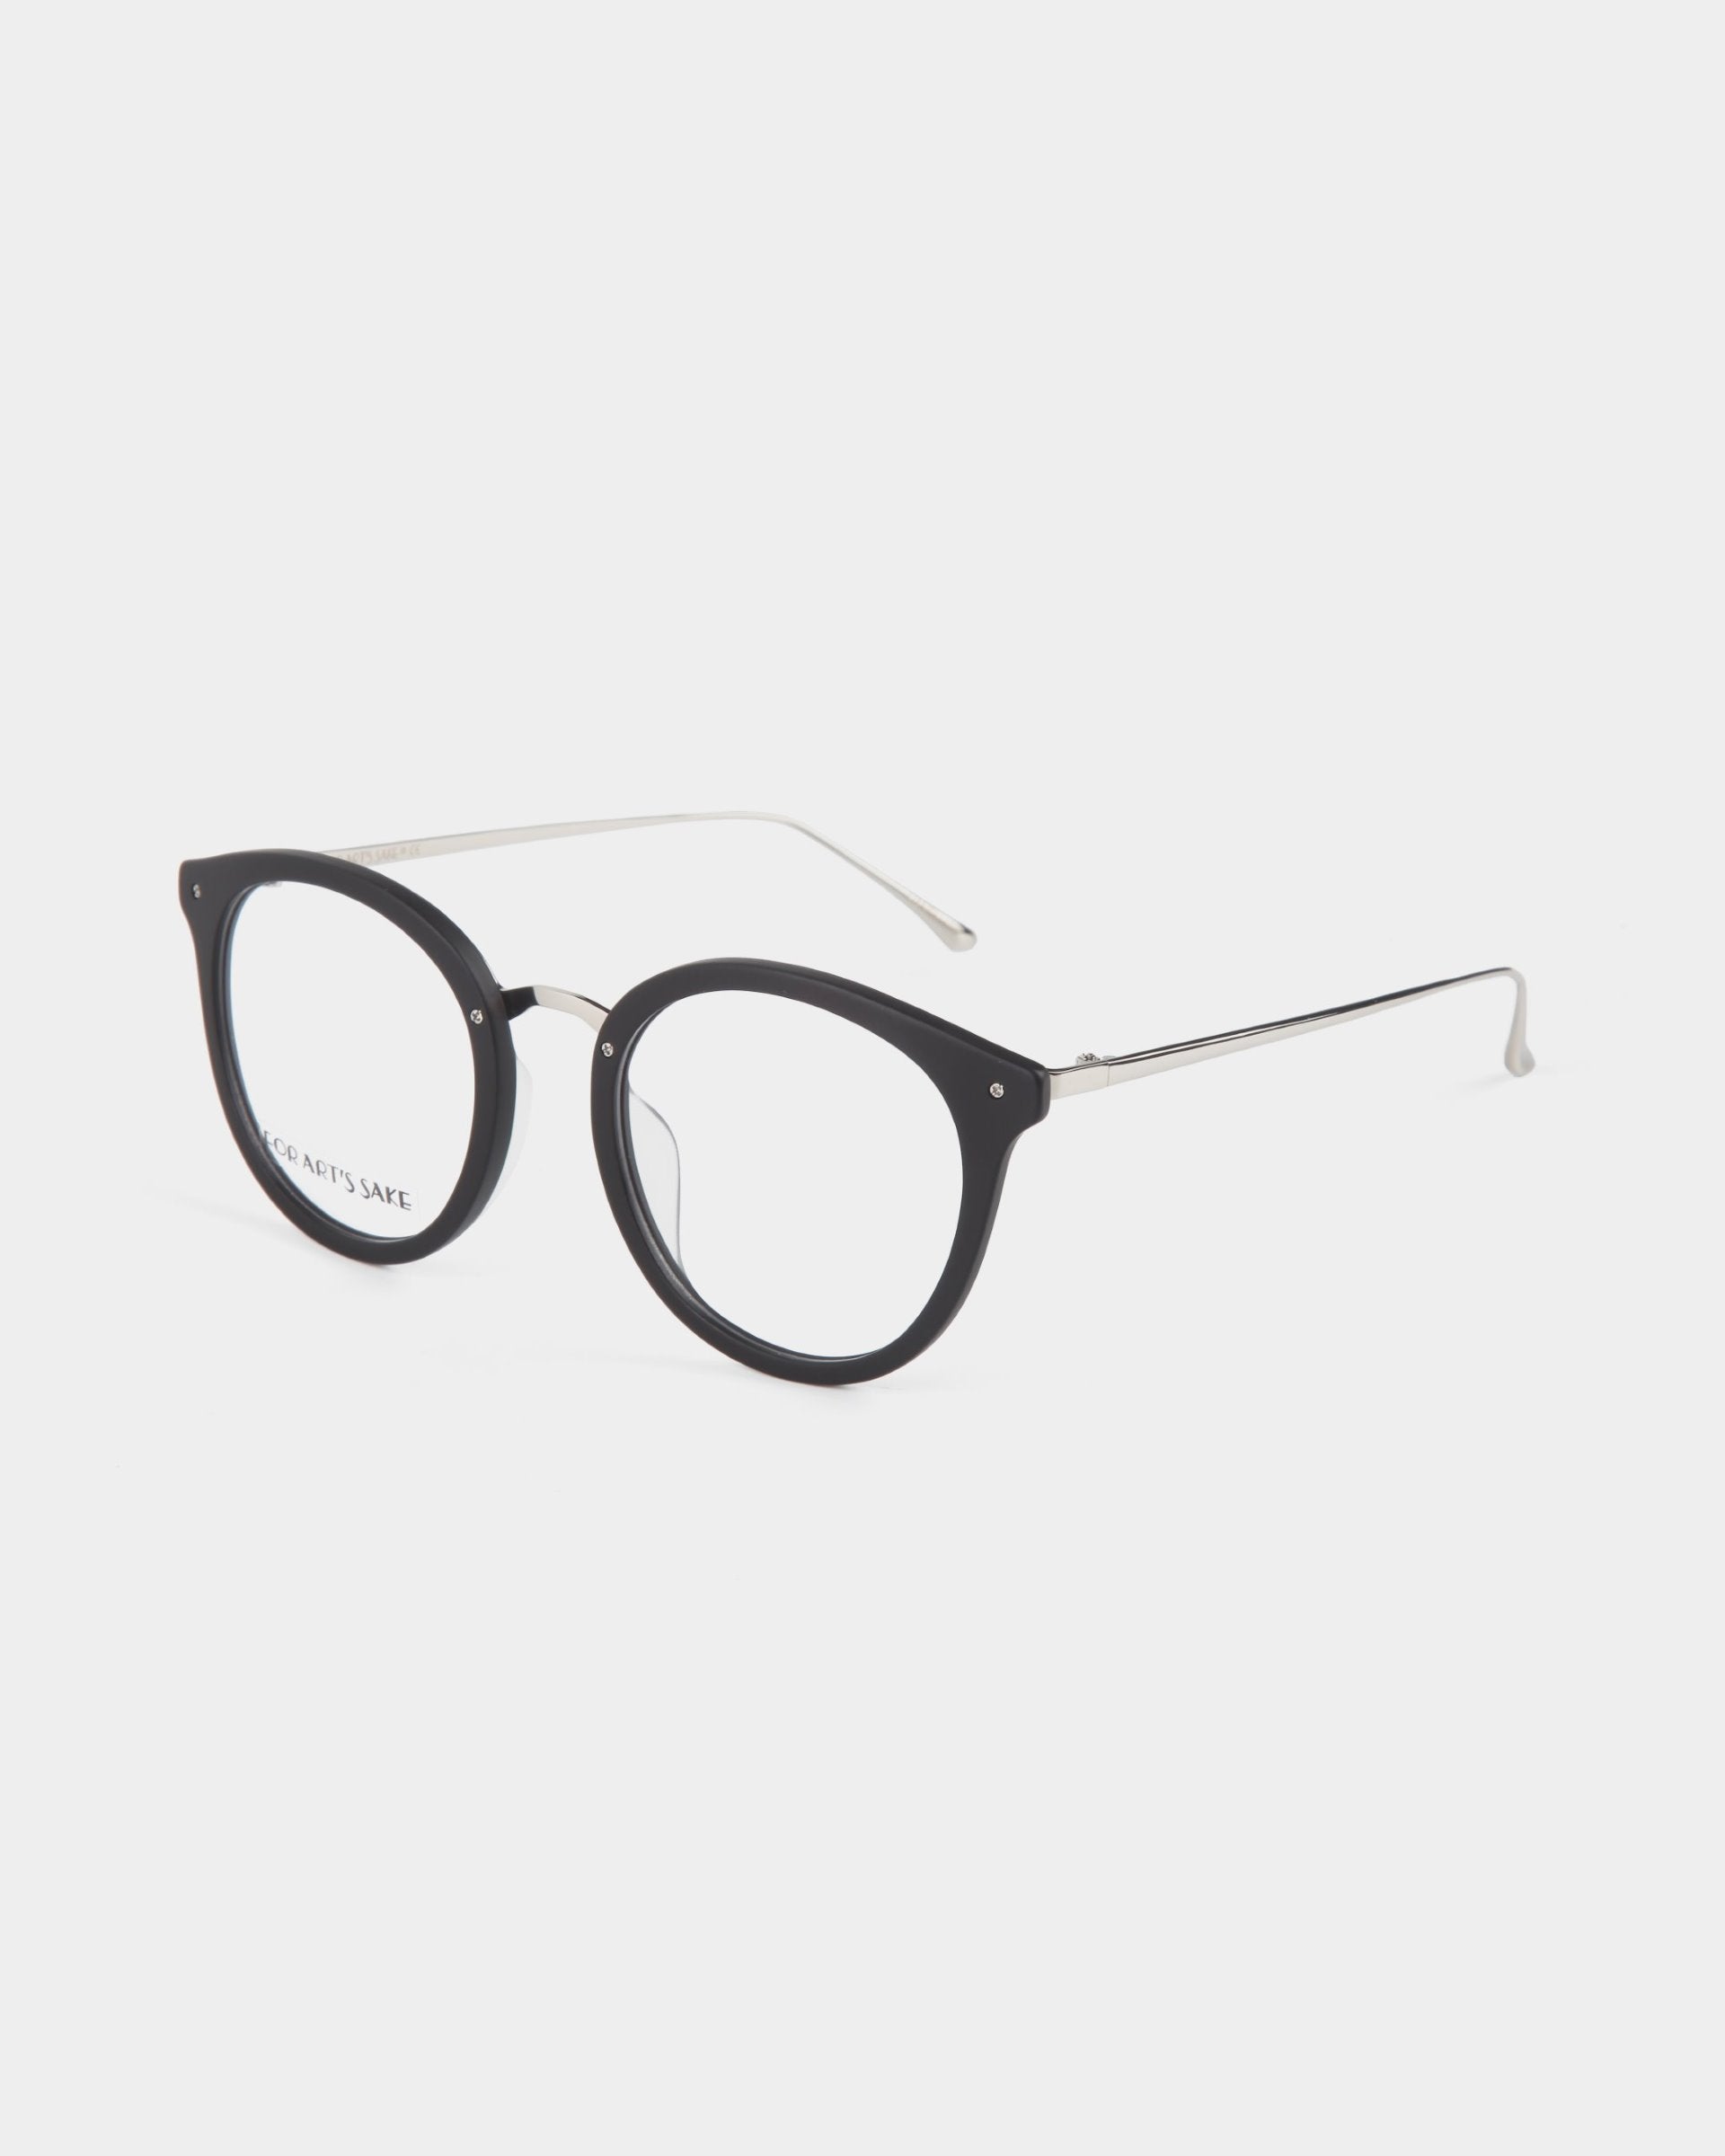 A pair of Jackie eyeglasses by For Art&#39;s Sake® with round black frames and thin metal temples. The lenses are clear and feature blue light filters, making the design modern and minimalist. The eyeglasses are displayed on a white background.